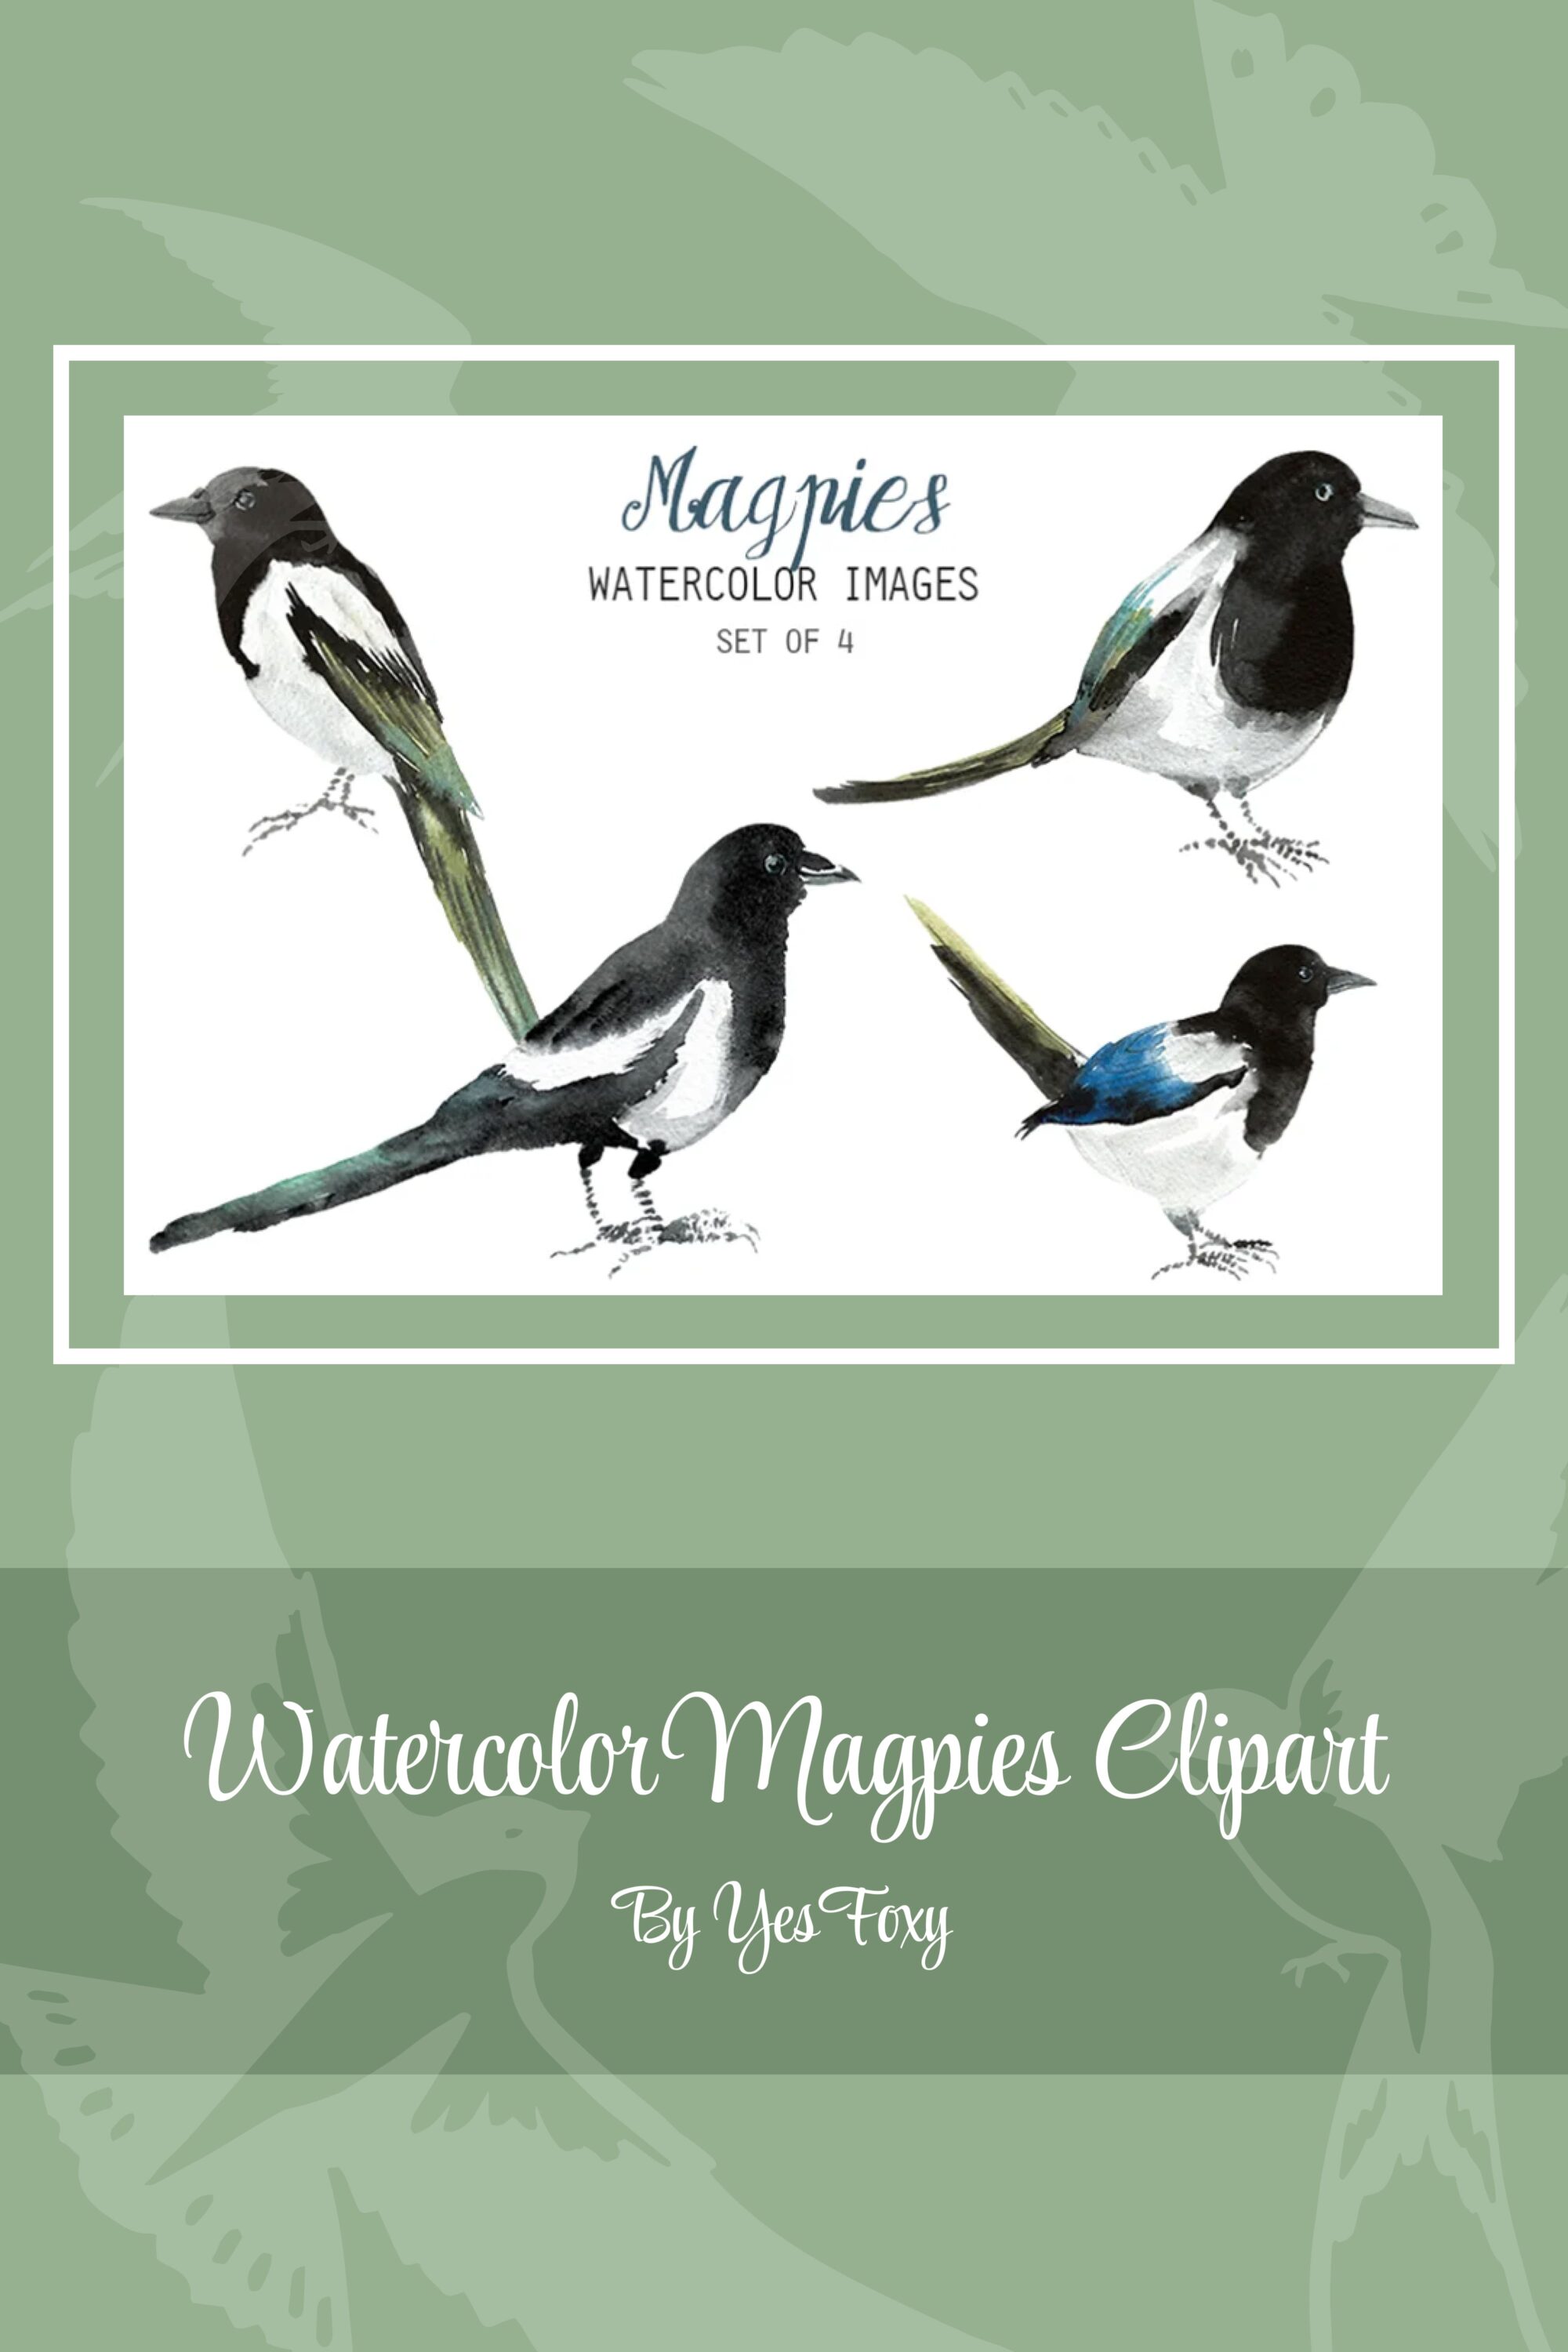 Watercolor Magpies Clipart pinterest image.